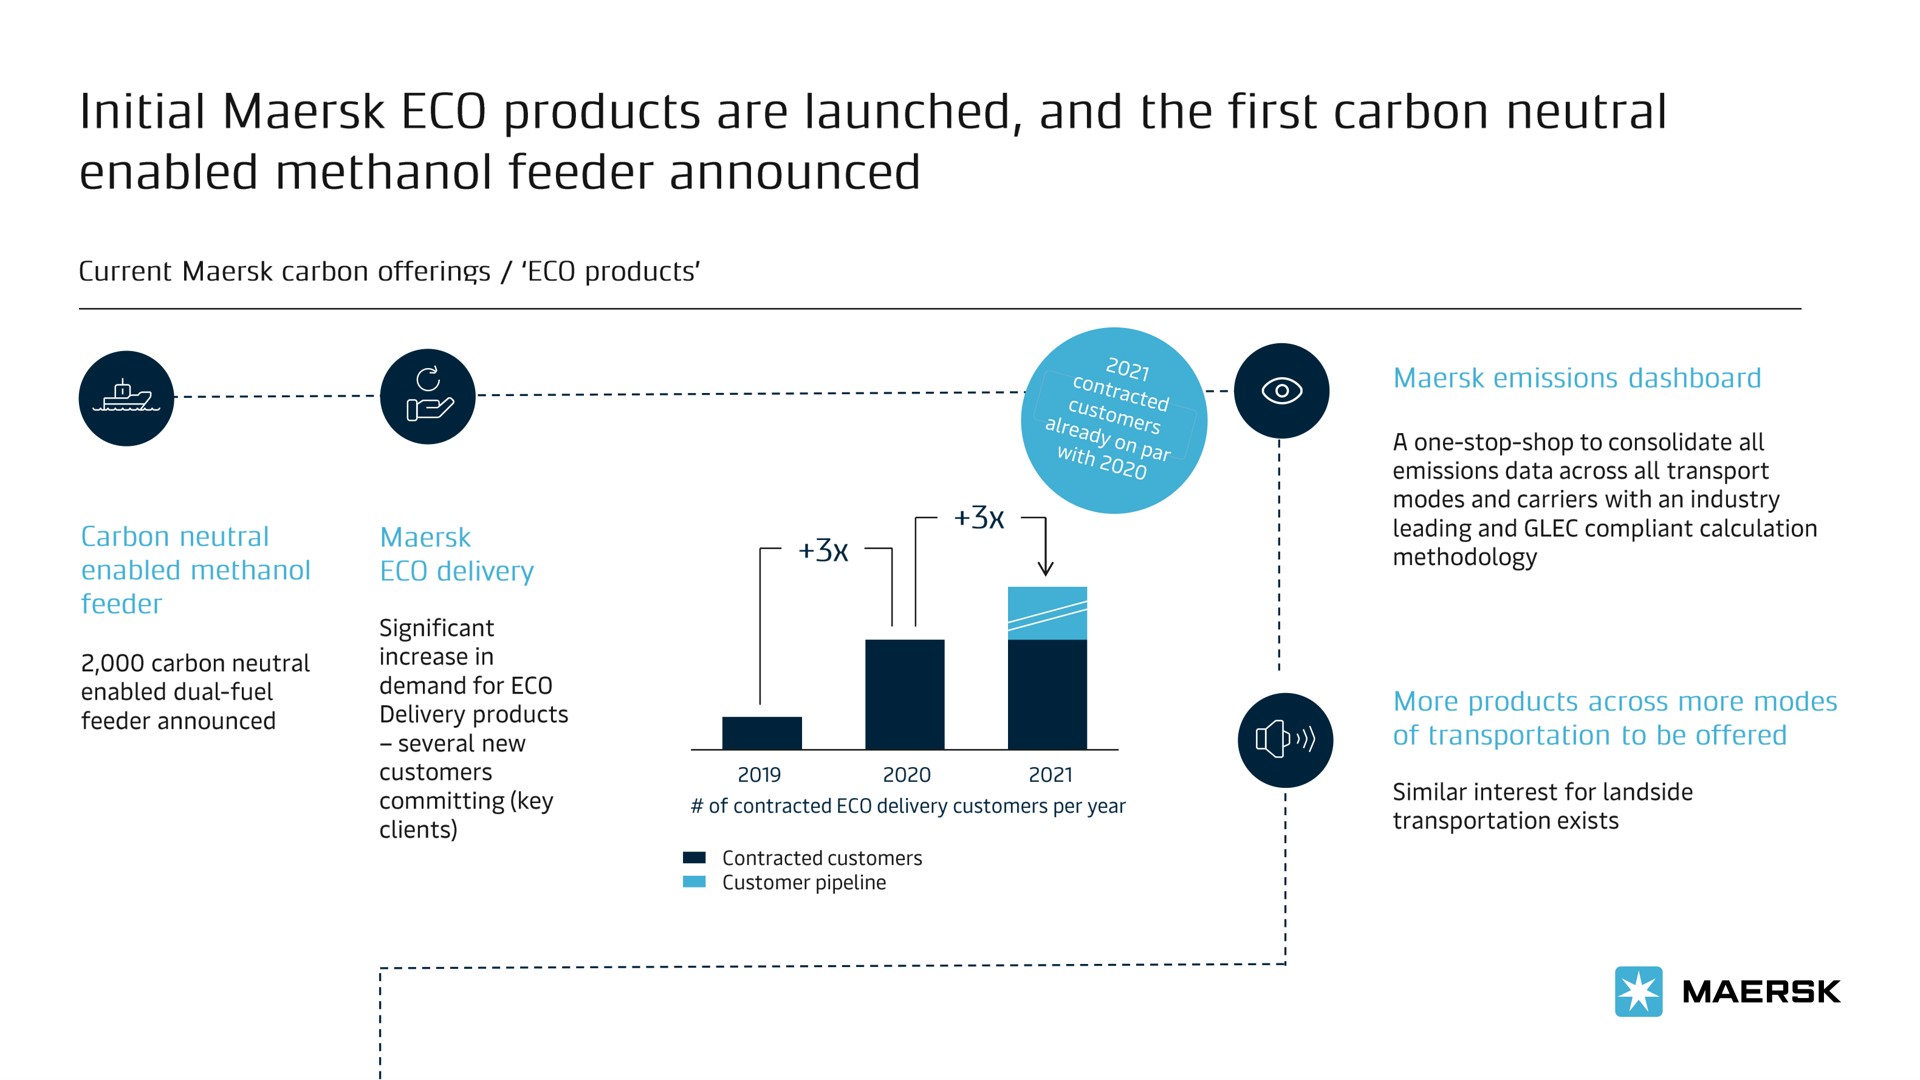 initial products are launched and the first carbon neutral enabled feeder announced | Maersk